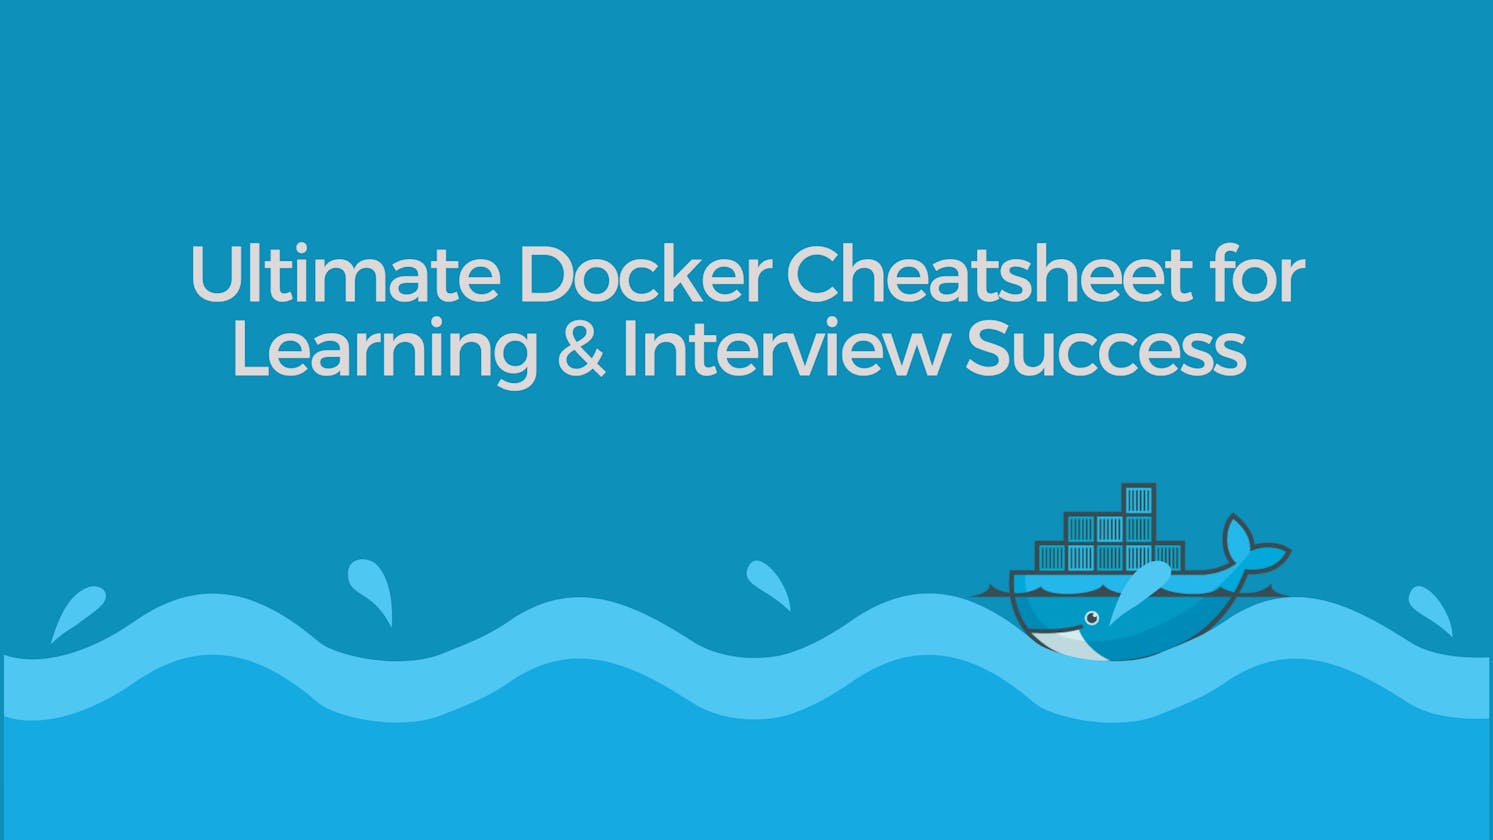 Your Ultimate Docker Cheatsheet for Learning and Interview Success